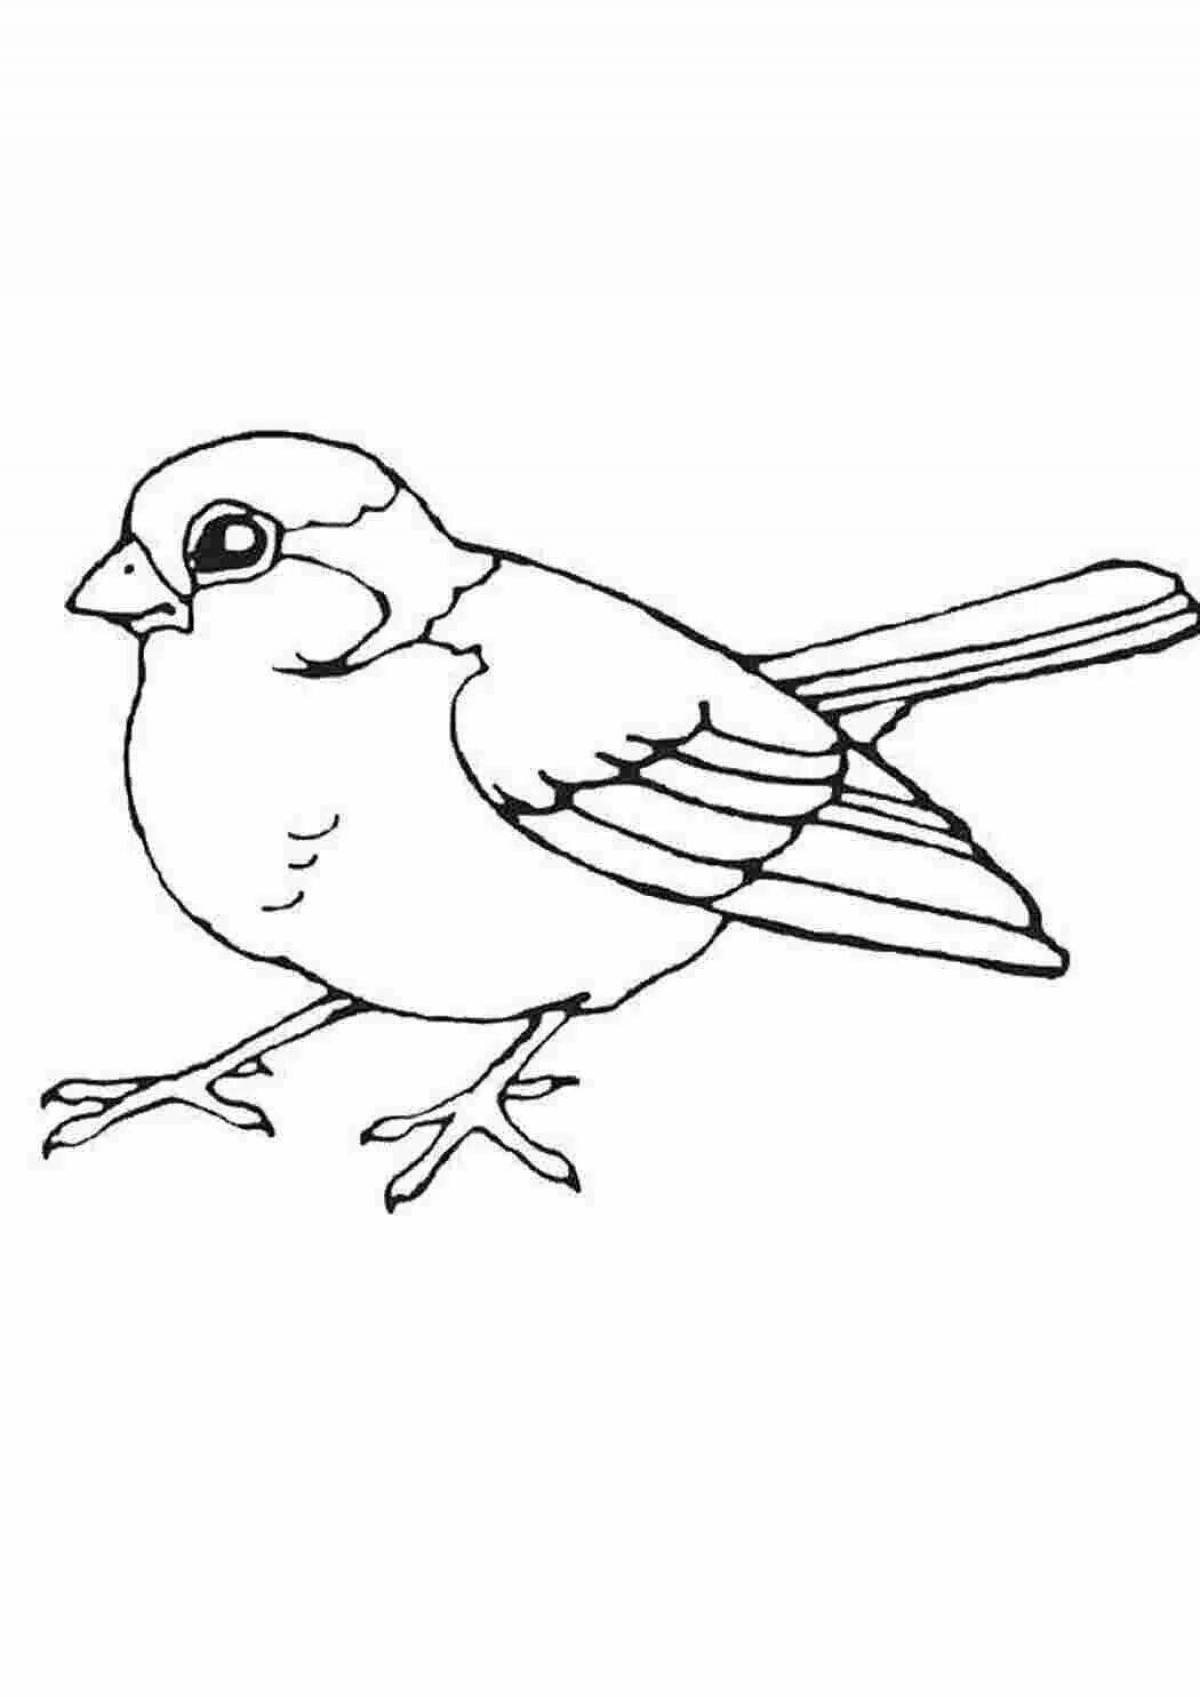 Charming sparrow coloring page